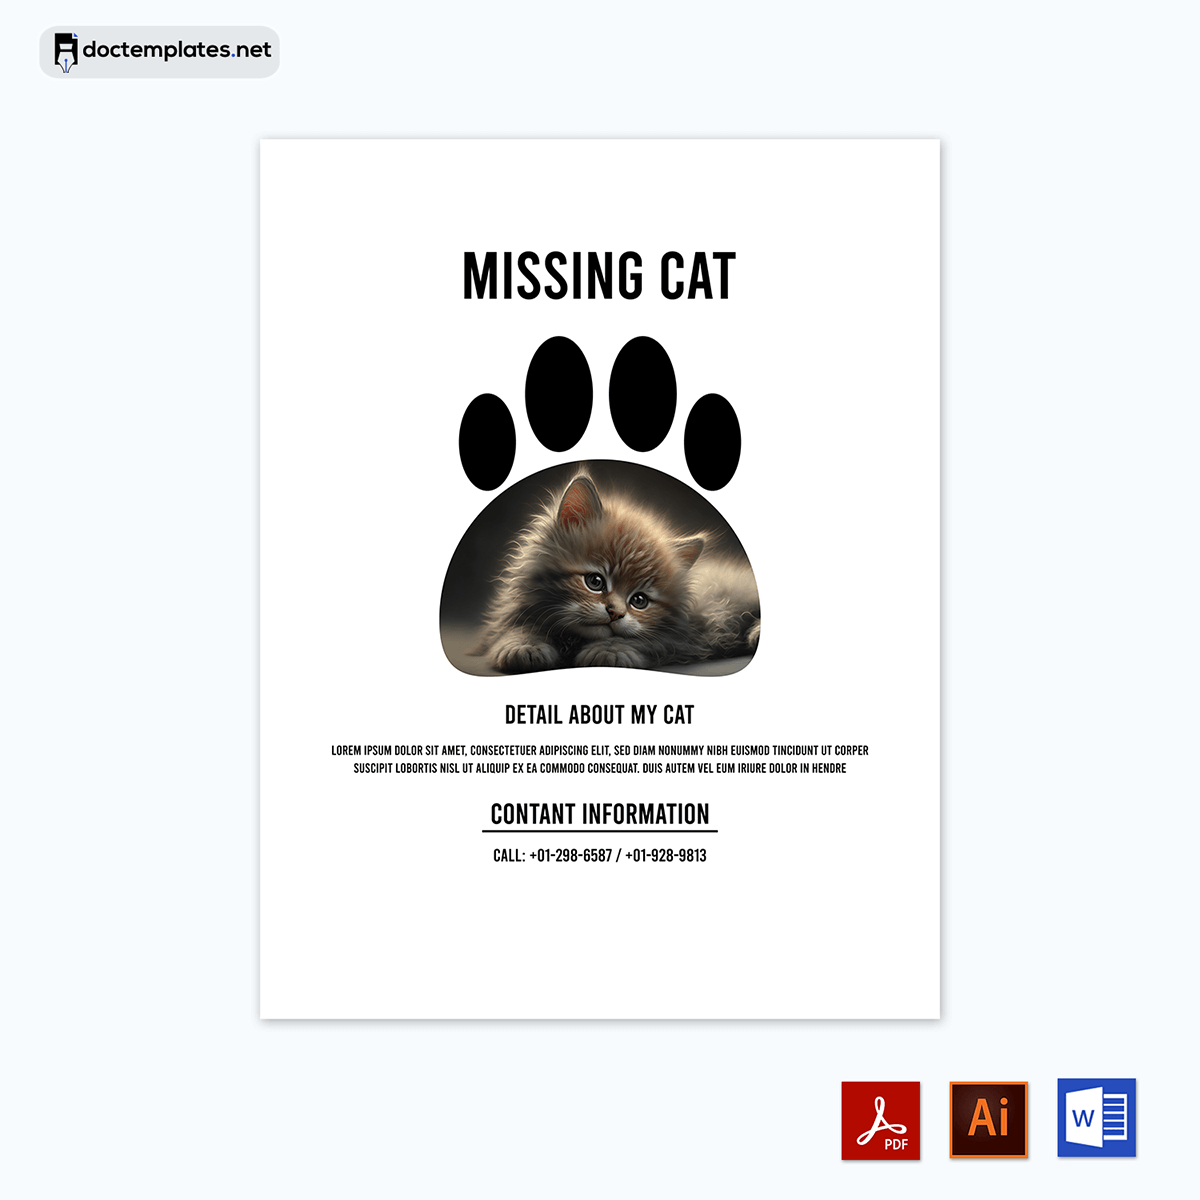 "Adobe Illustrator Masterpiece" - Showcase your design skills and create an outstanding lost pet flyer using Adobe Illustrator.